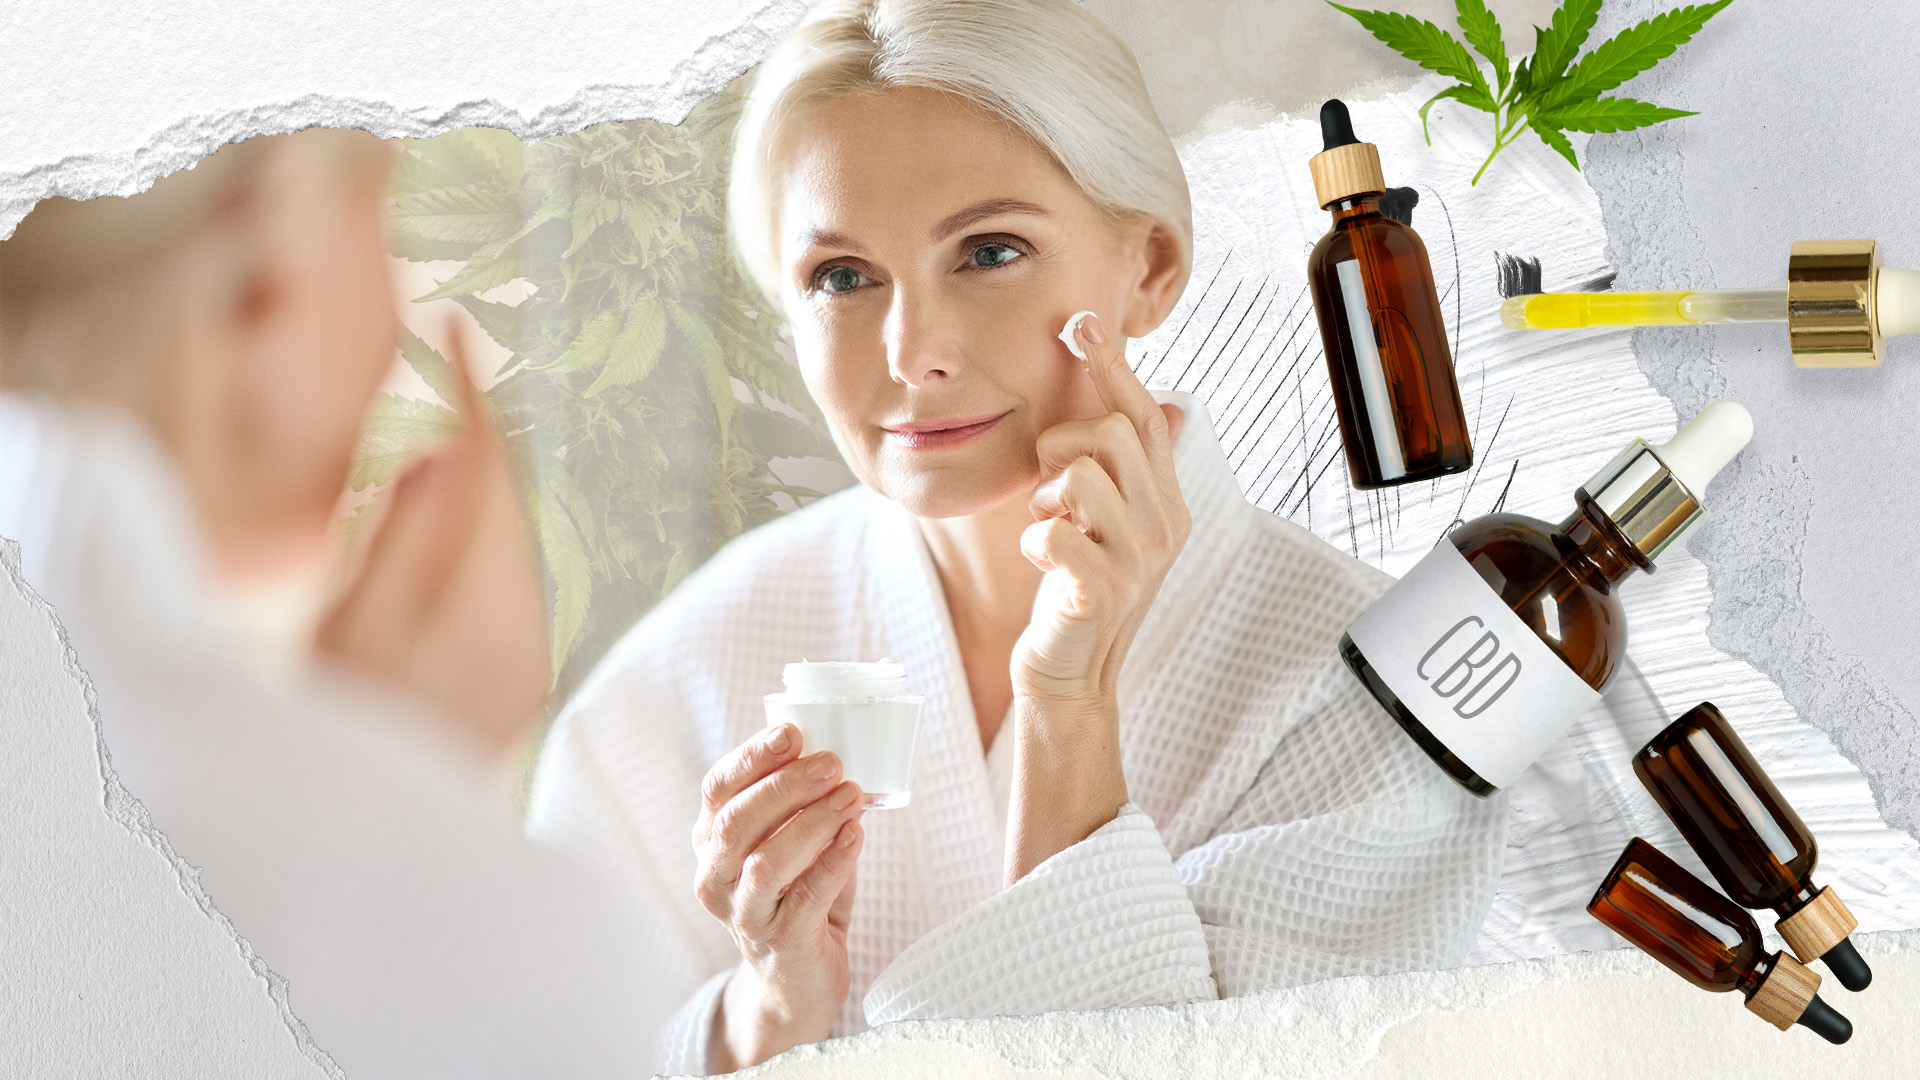 Can CBD Be Used For Anti-Aging?